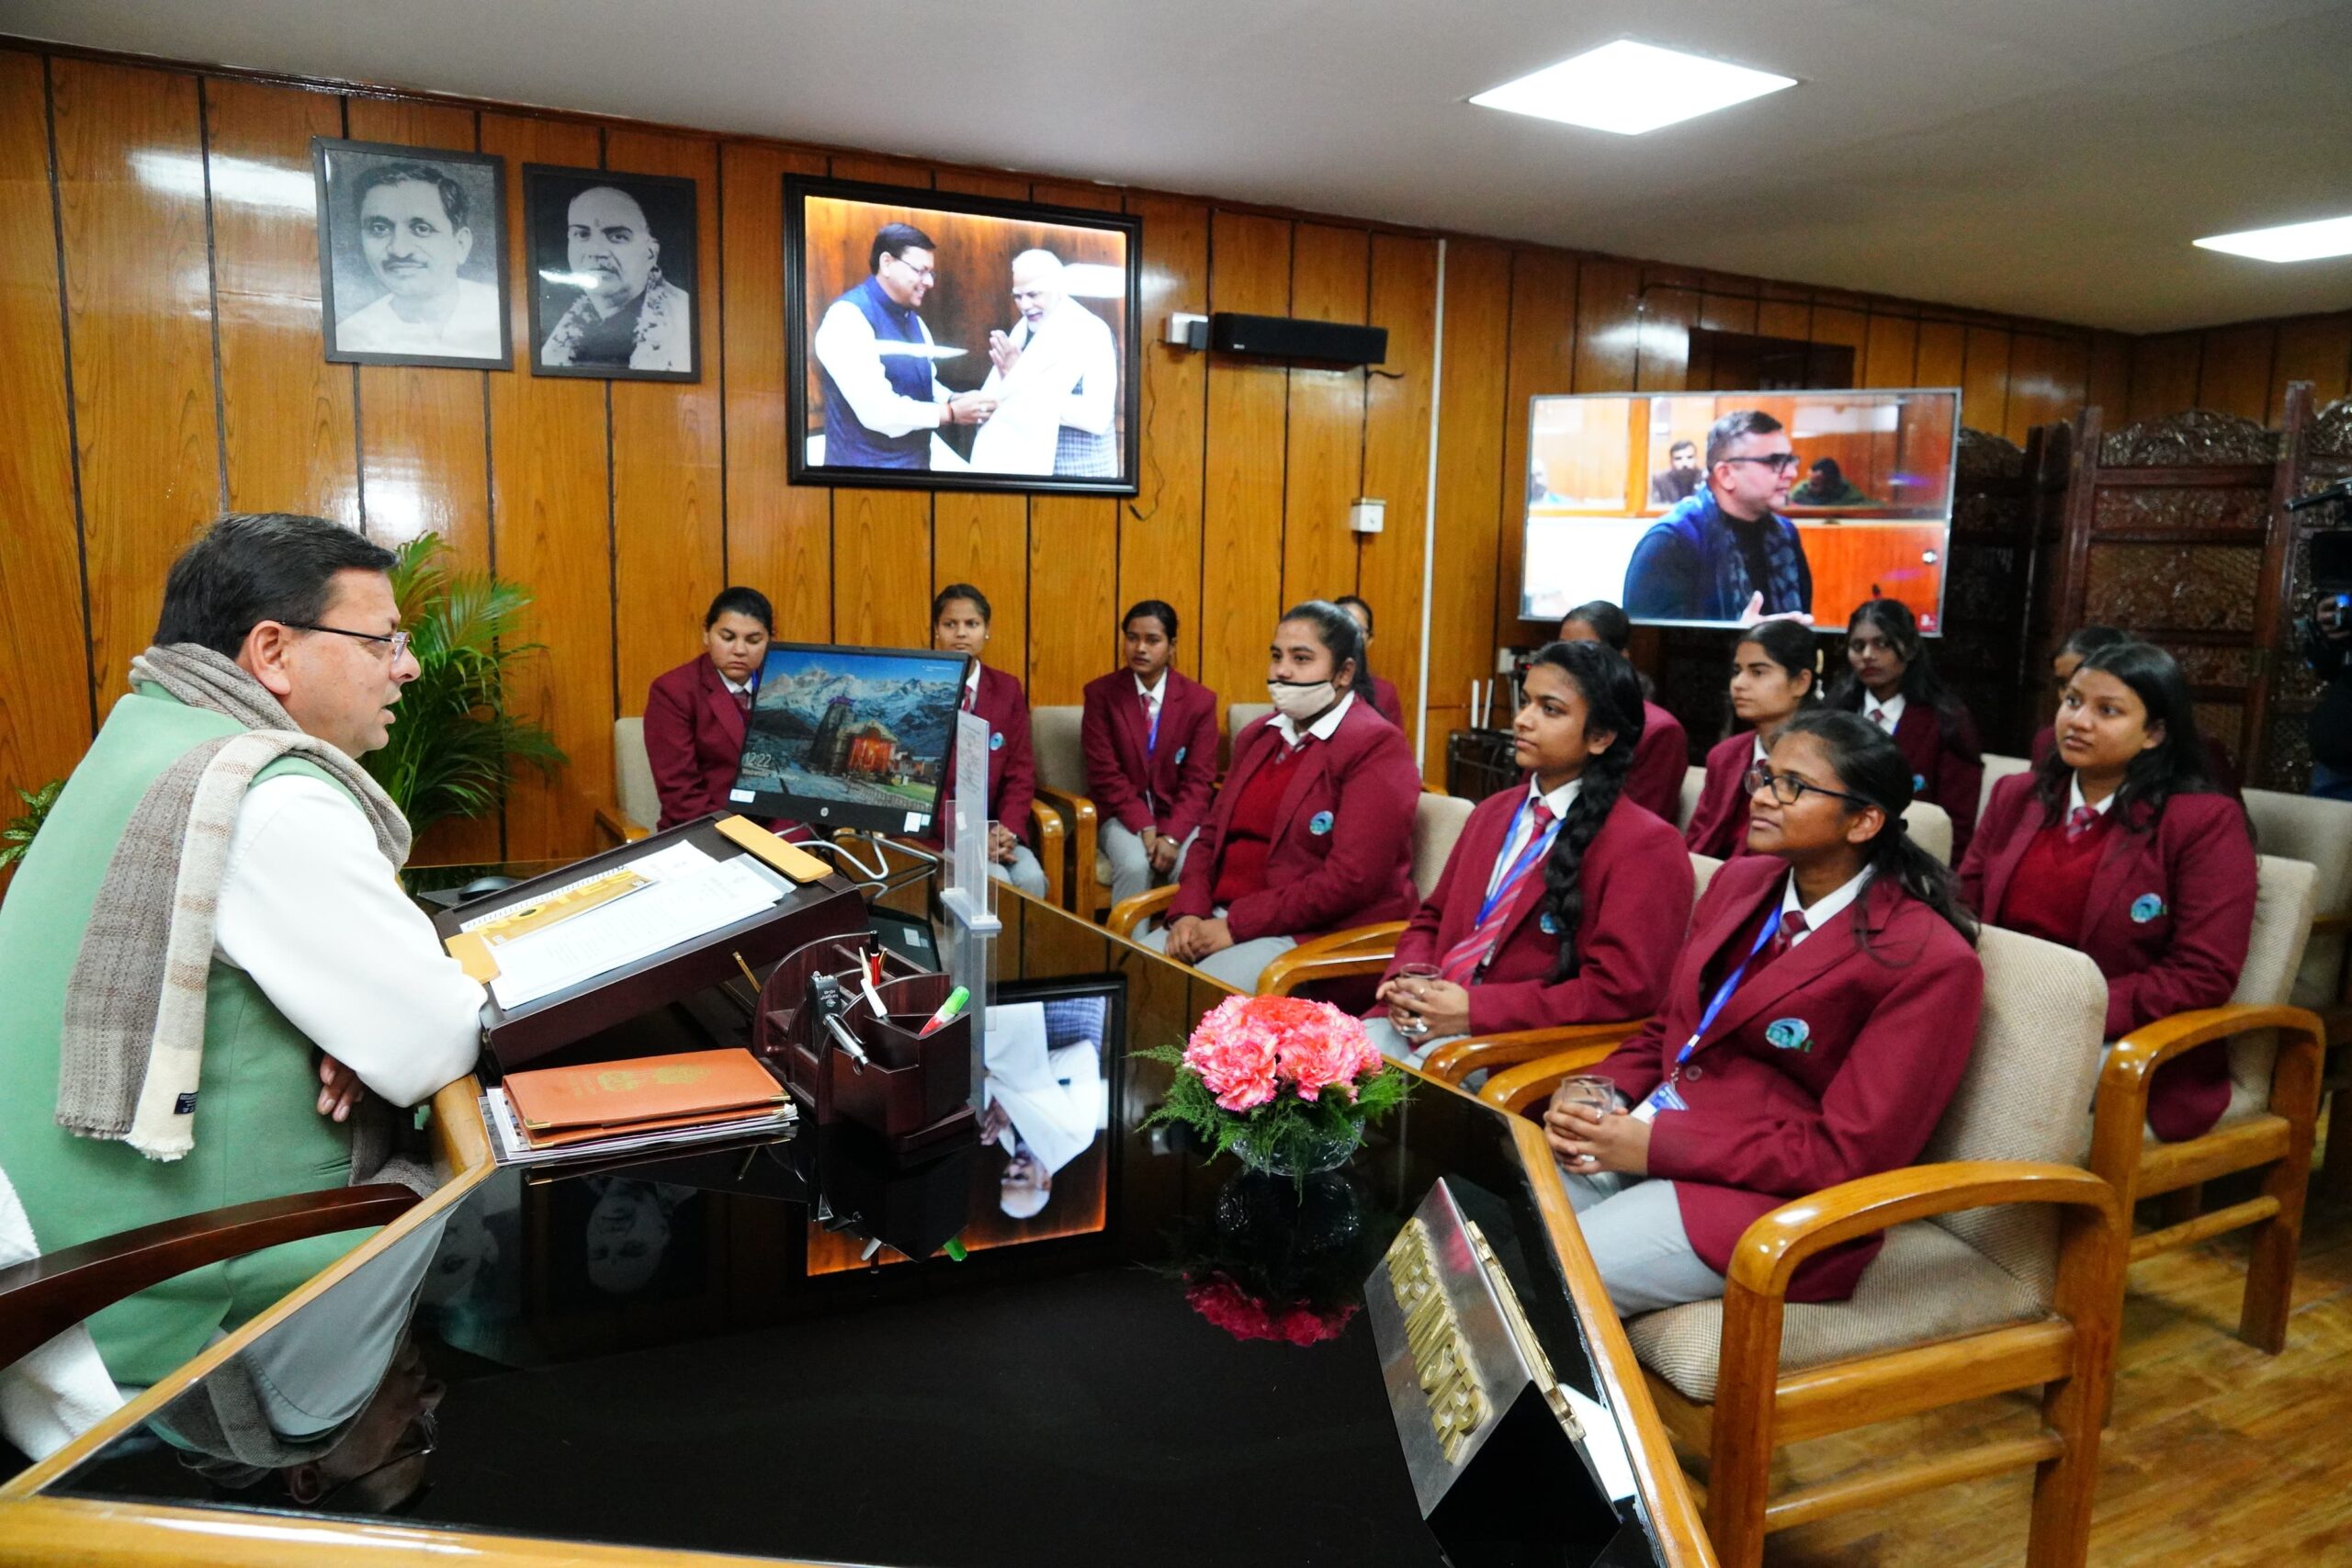 MIT students who came to watch the assembly proceedings met the CM